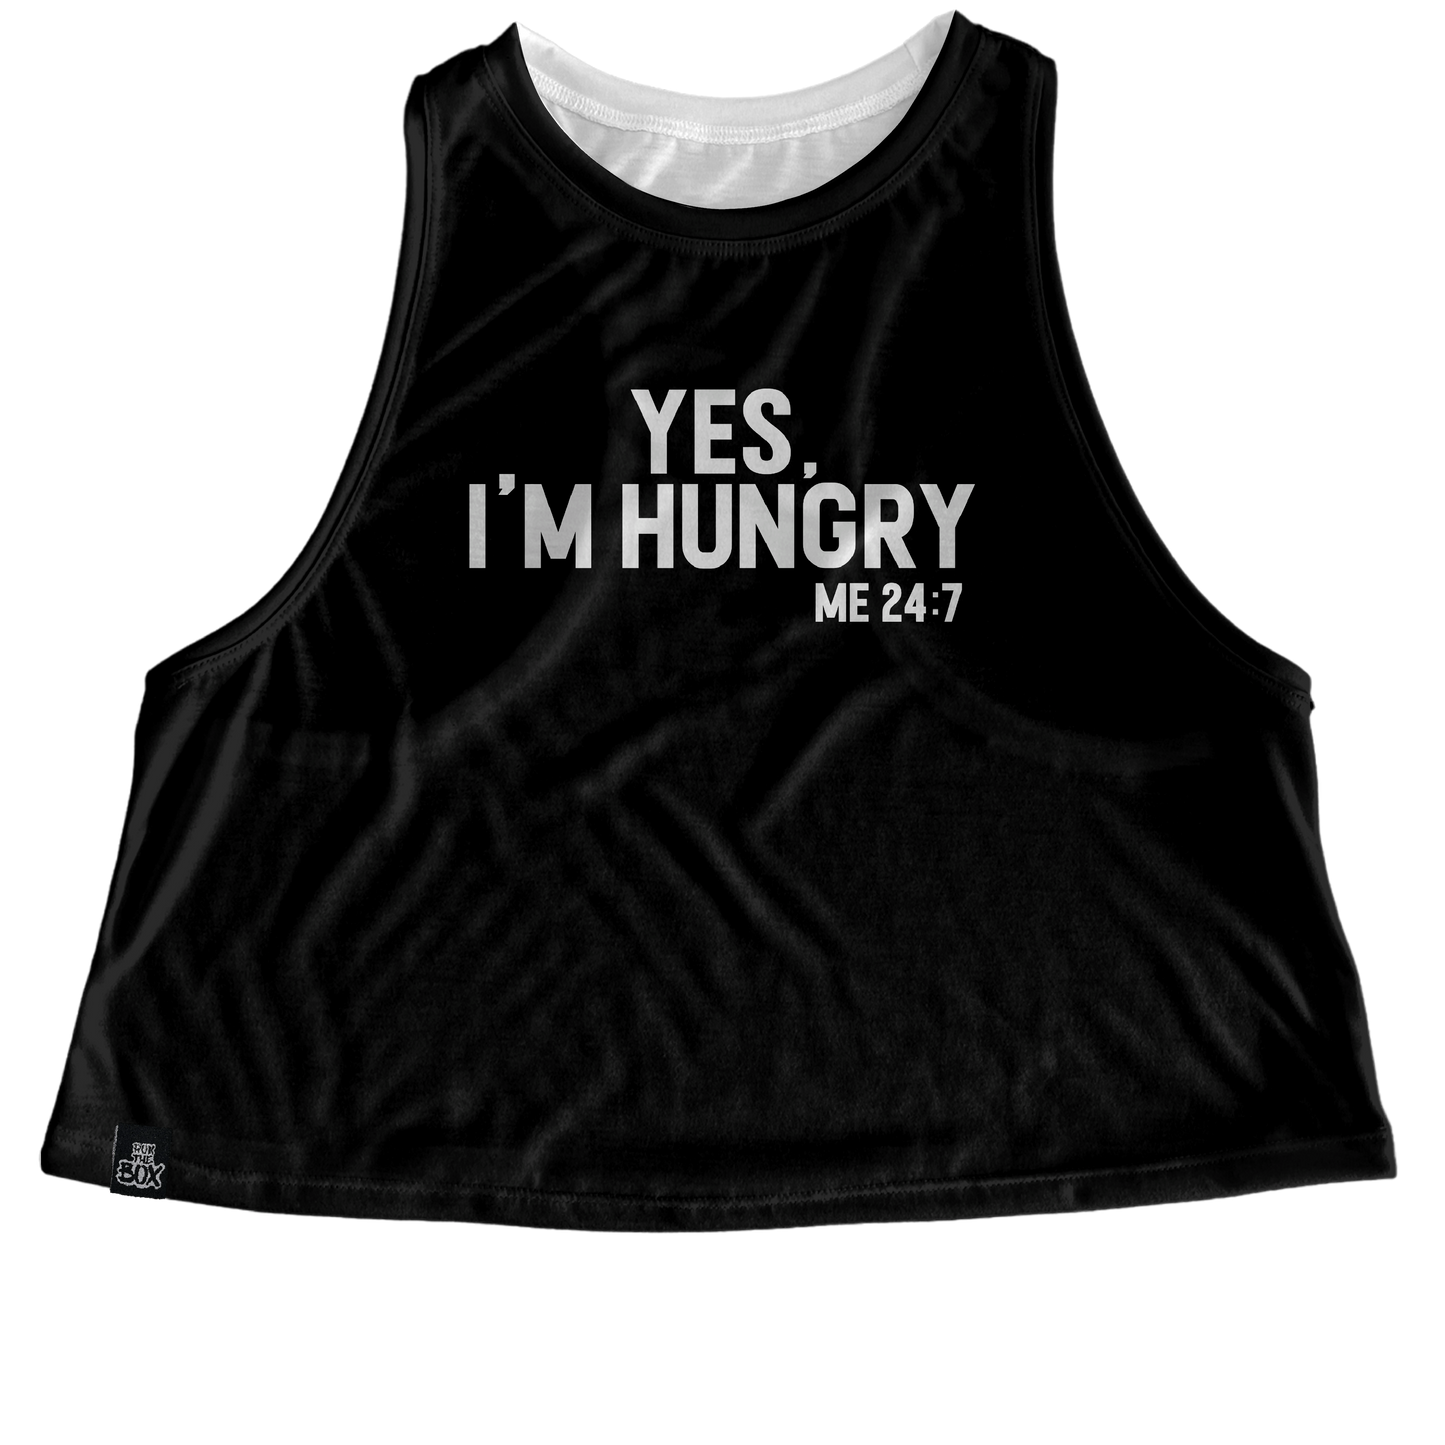 Yes, I’m Hungry (black)Tops